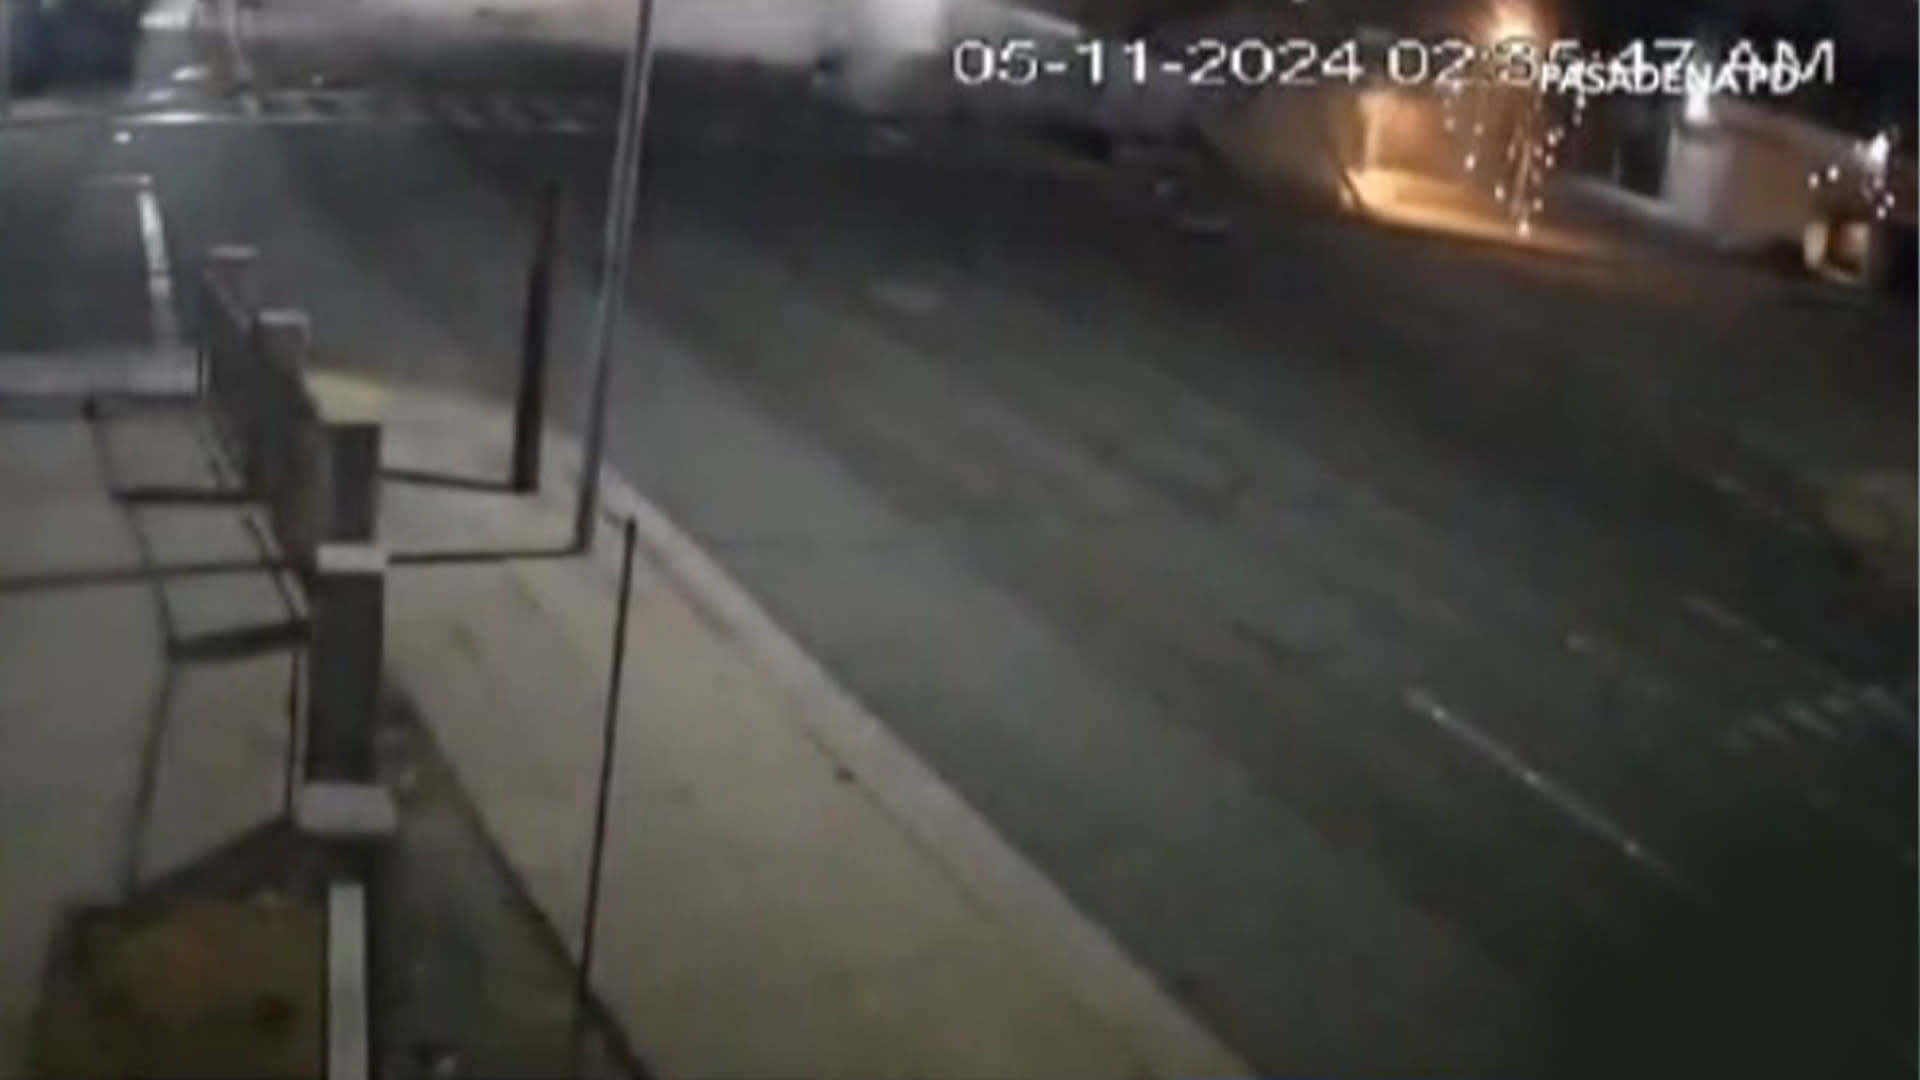 Horrific moment car launches into the air & hits street light in deadly crash